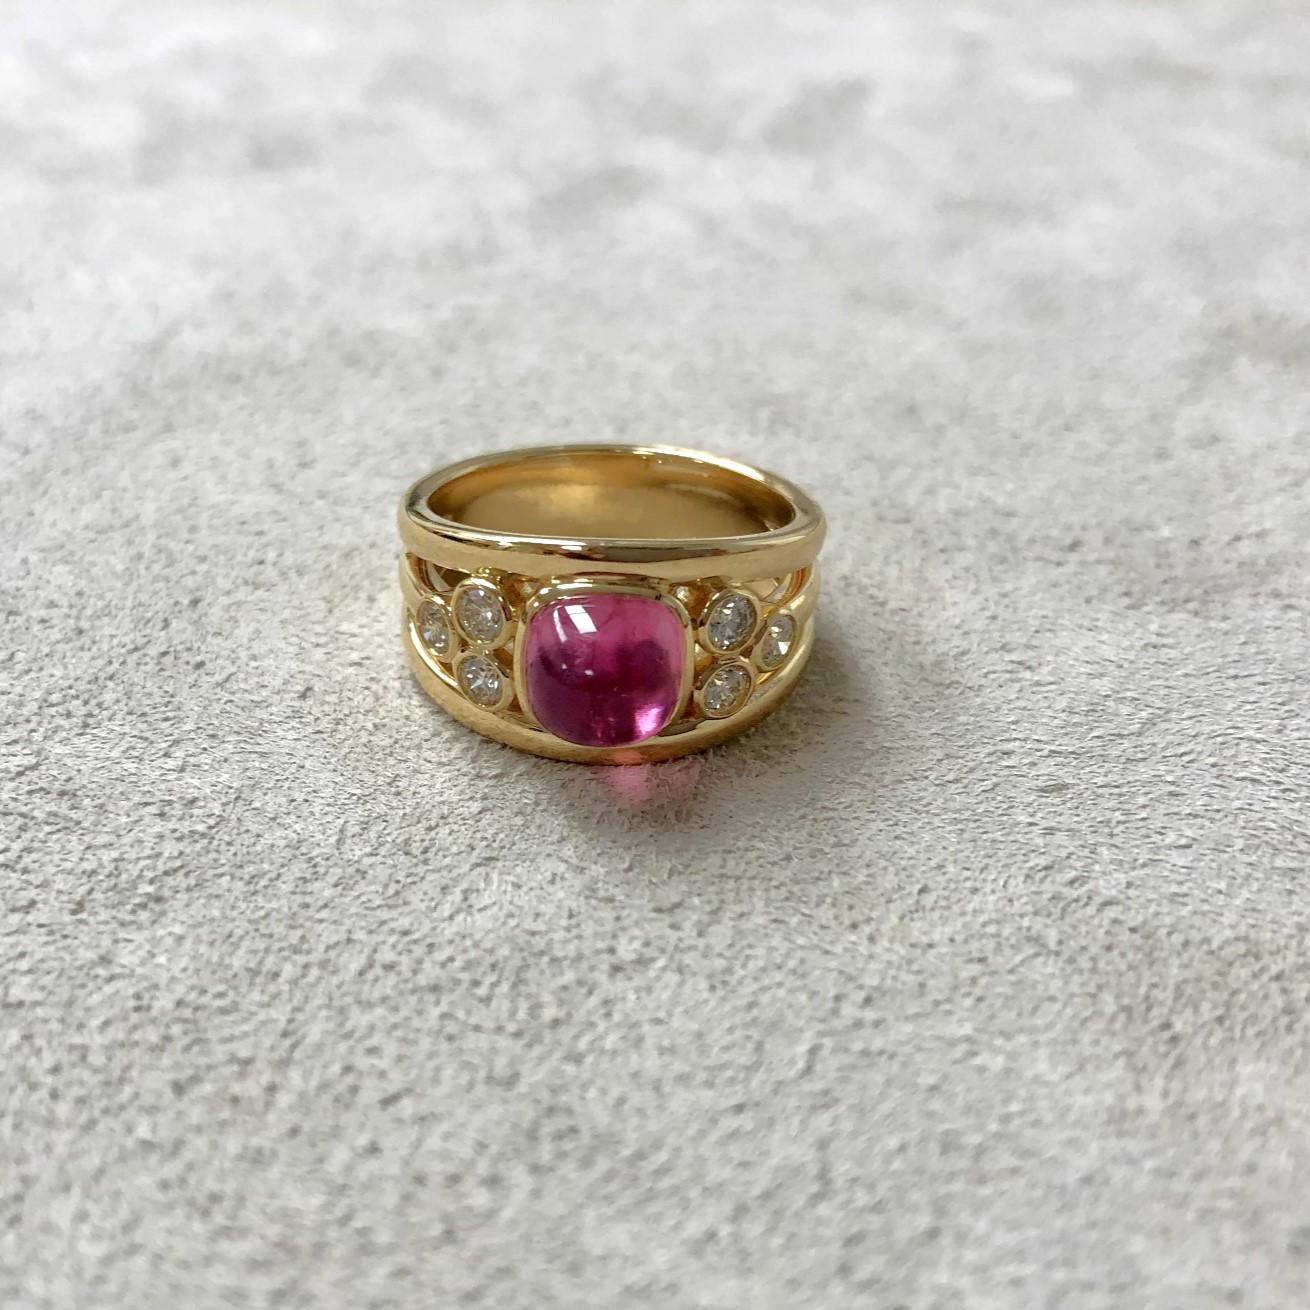 Created in 18 karat yellow gold
Rubellite 2 carats approx.
Diamonds 0.30 carat approx.                          
Ring size US 7



About the Designers ~ Dharmesh & Namrata

Drawing inspiration from little things, Dharmesh & Namrata Kothari have